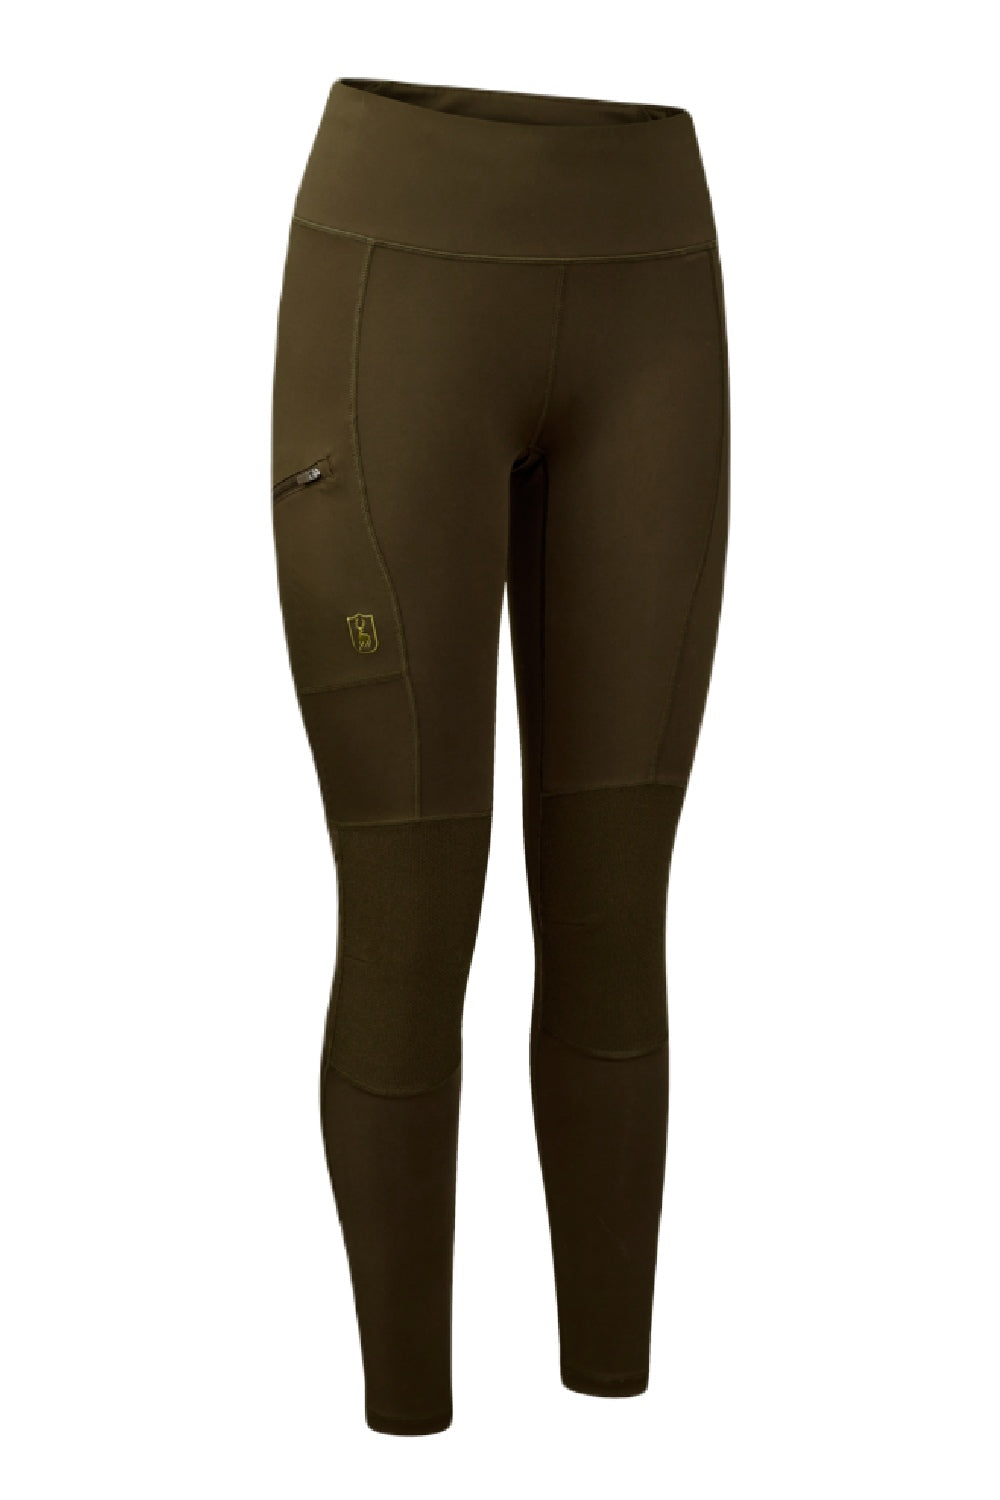 Free Country Trail To Town Tights - Women's